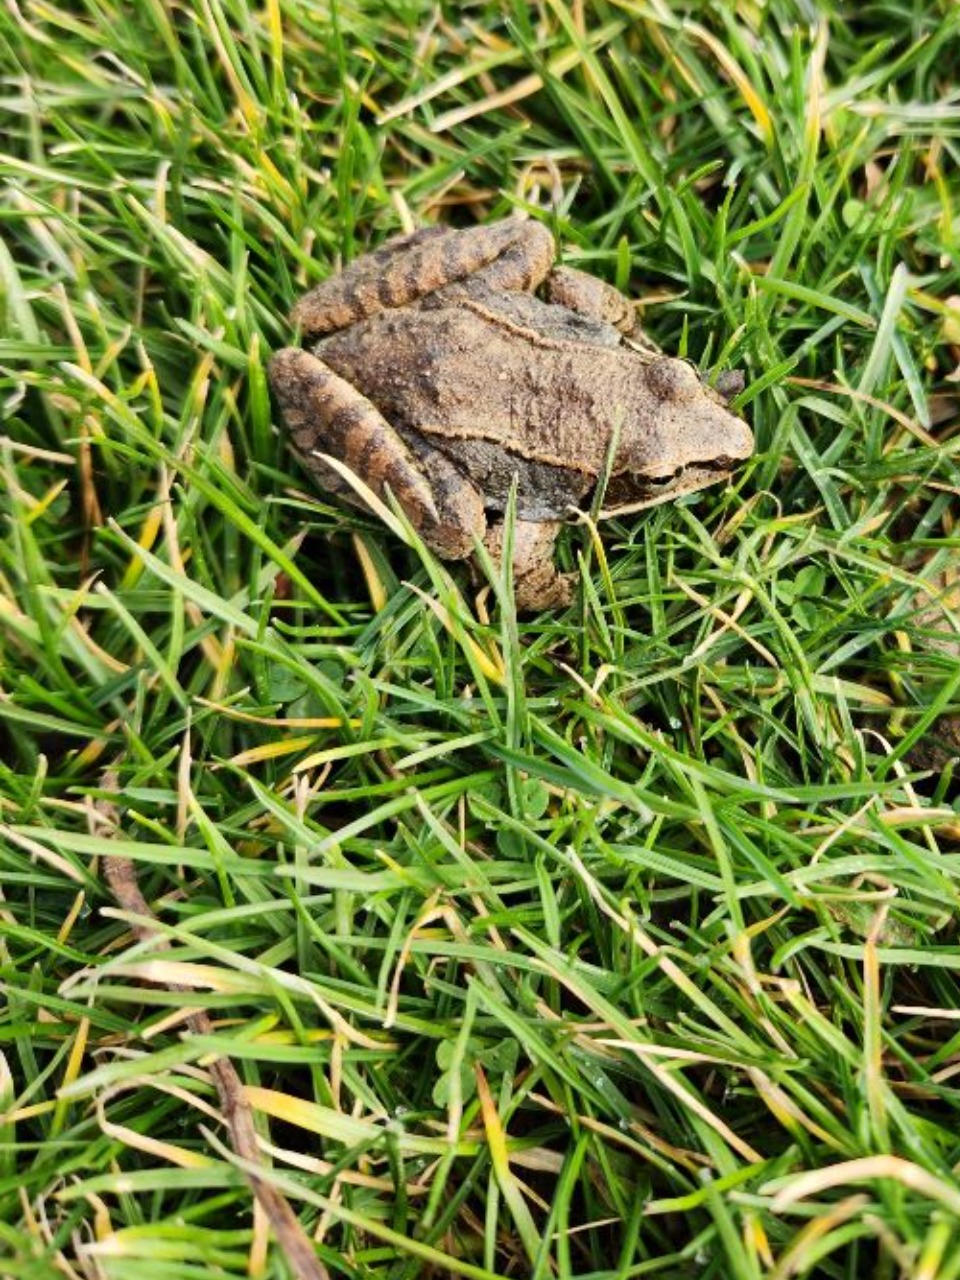 Toad in grass